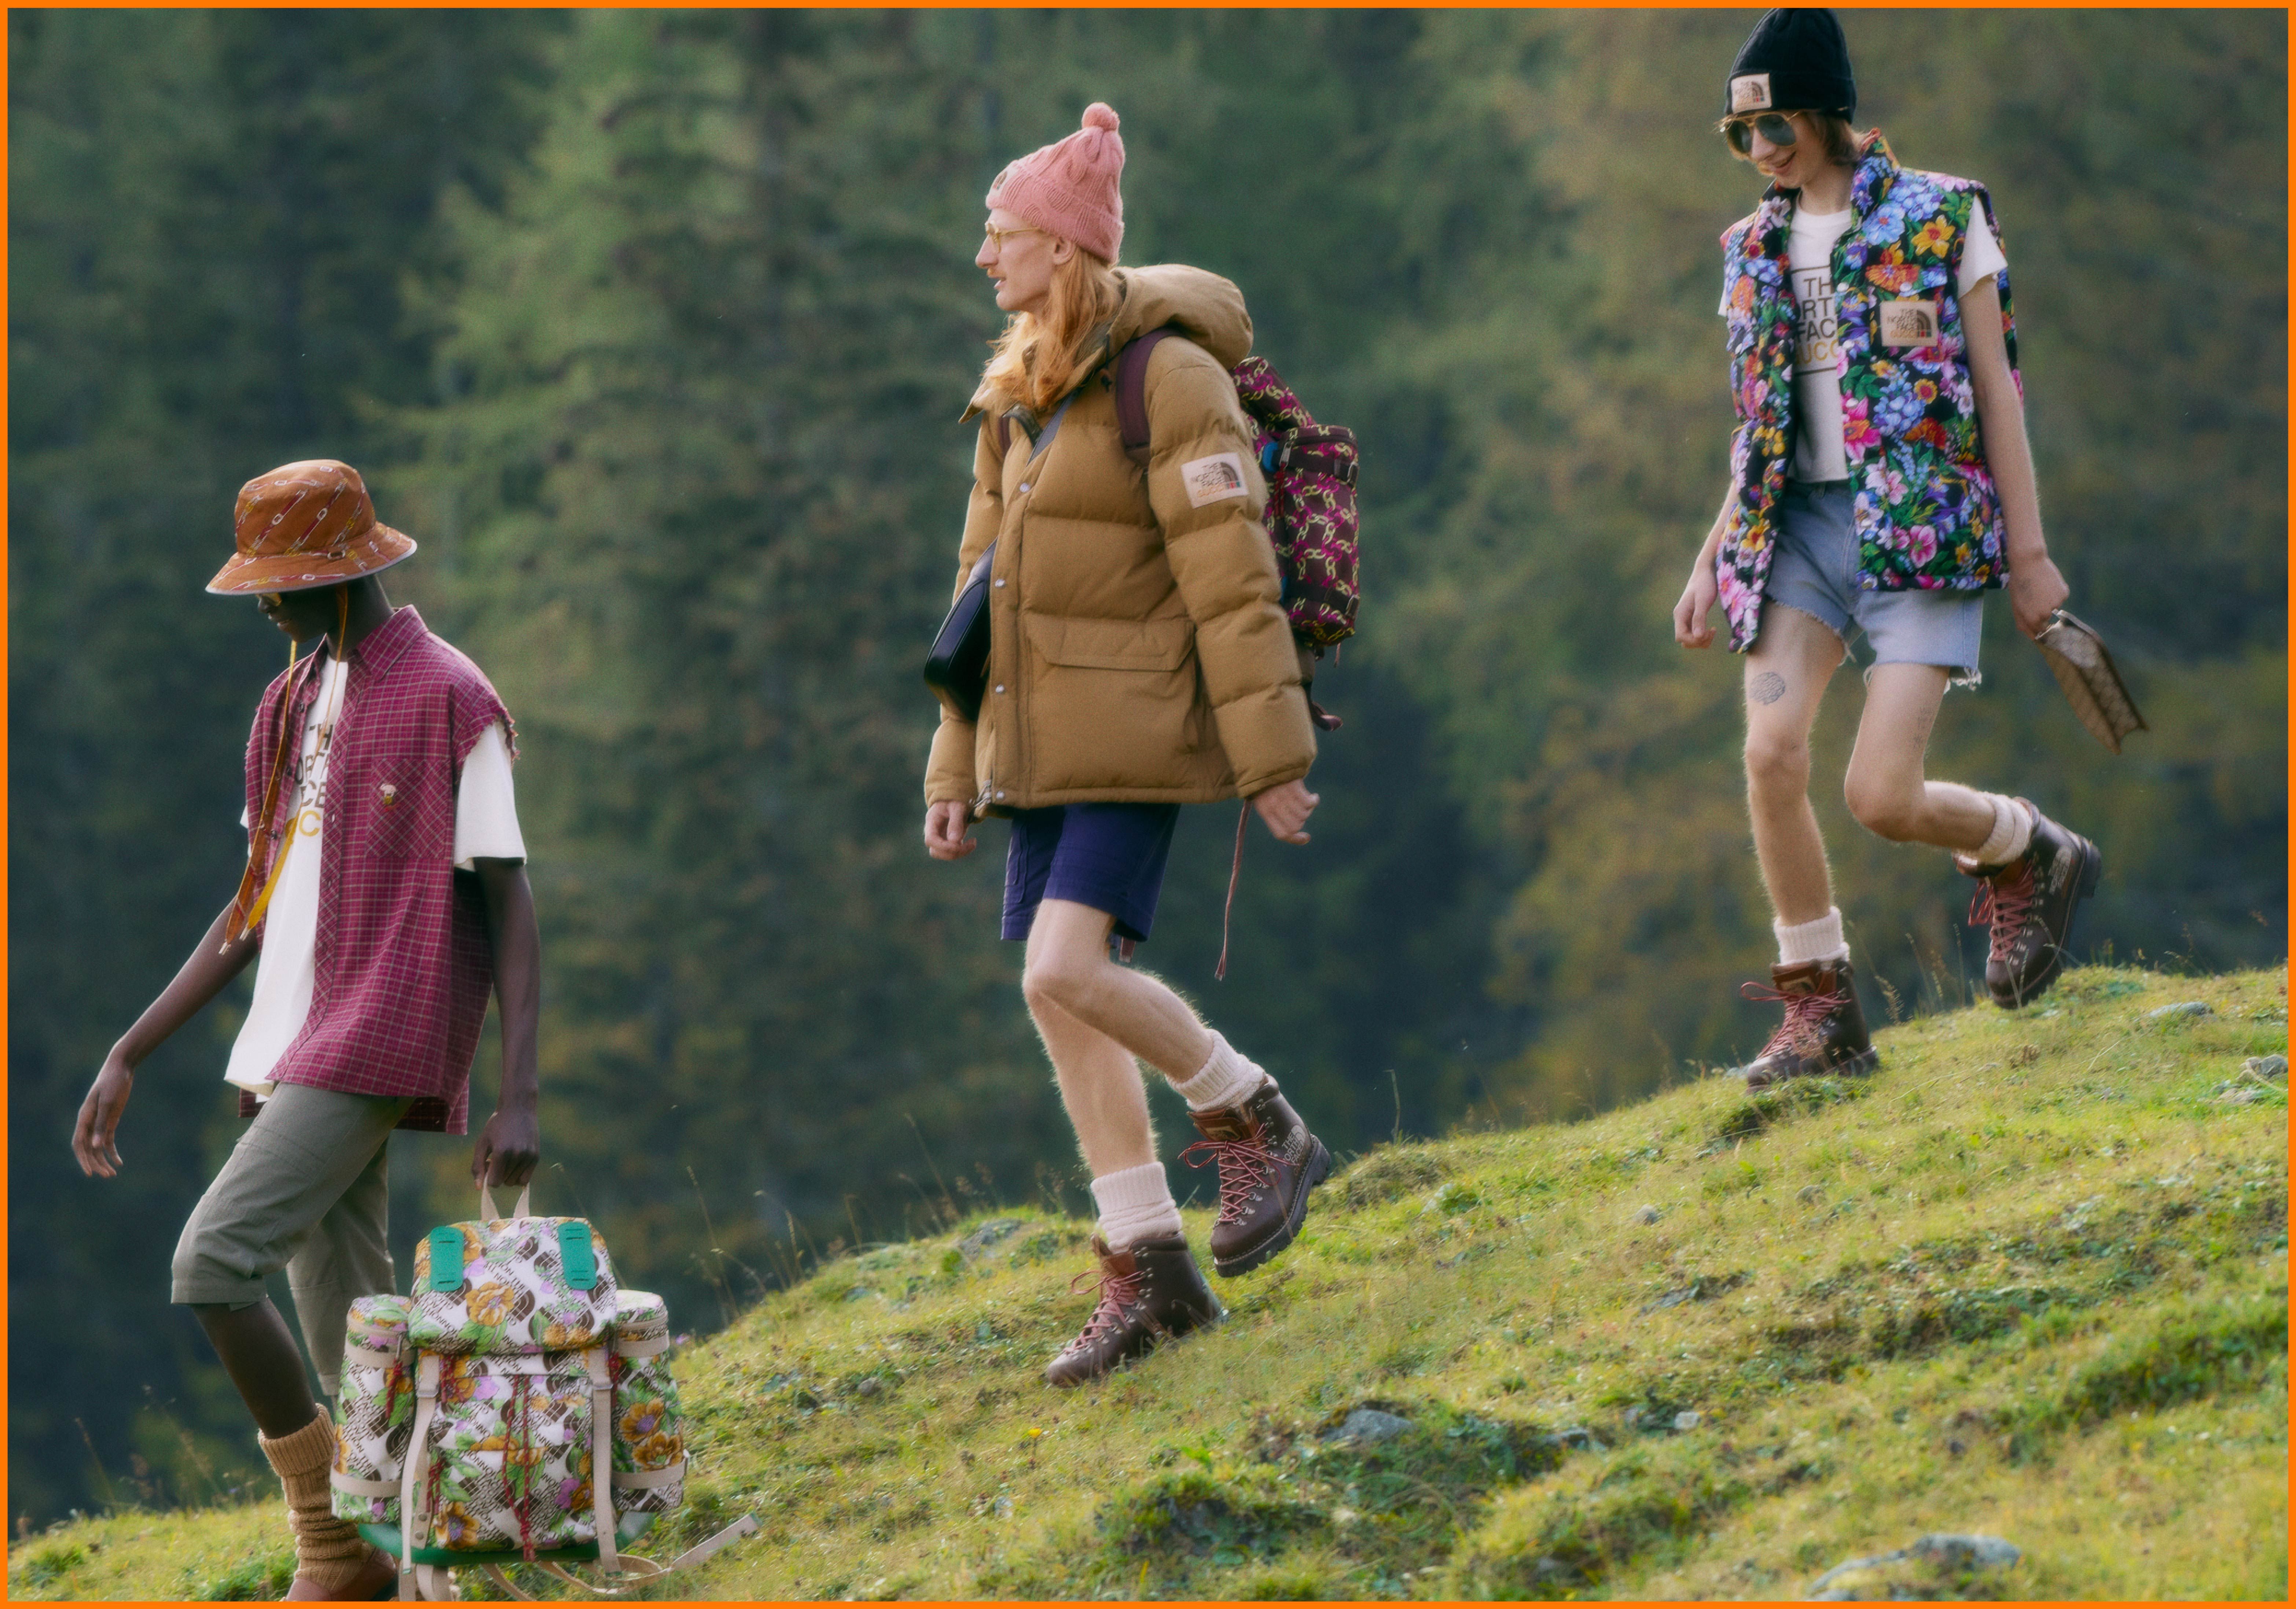 The Fashion Retailer gucci-the-north-face -collaboration-sustainability-luxury-lifestyle